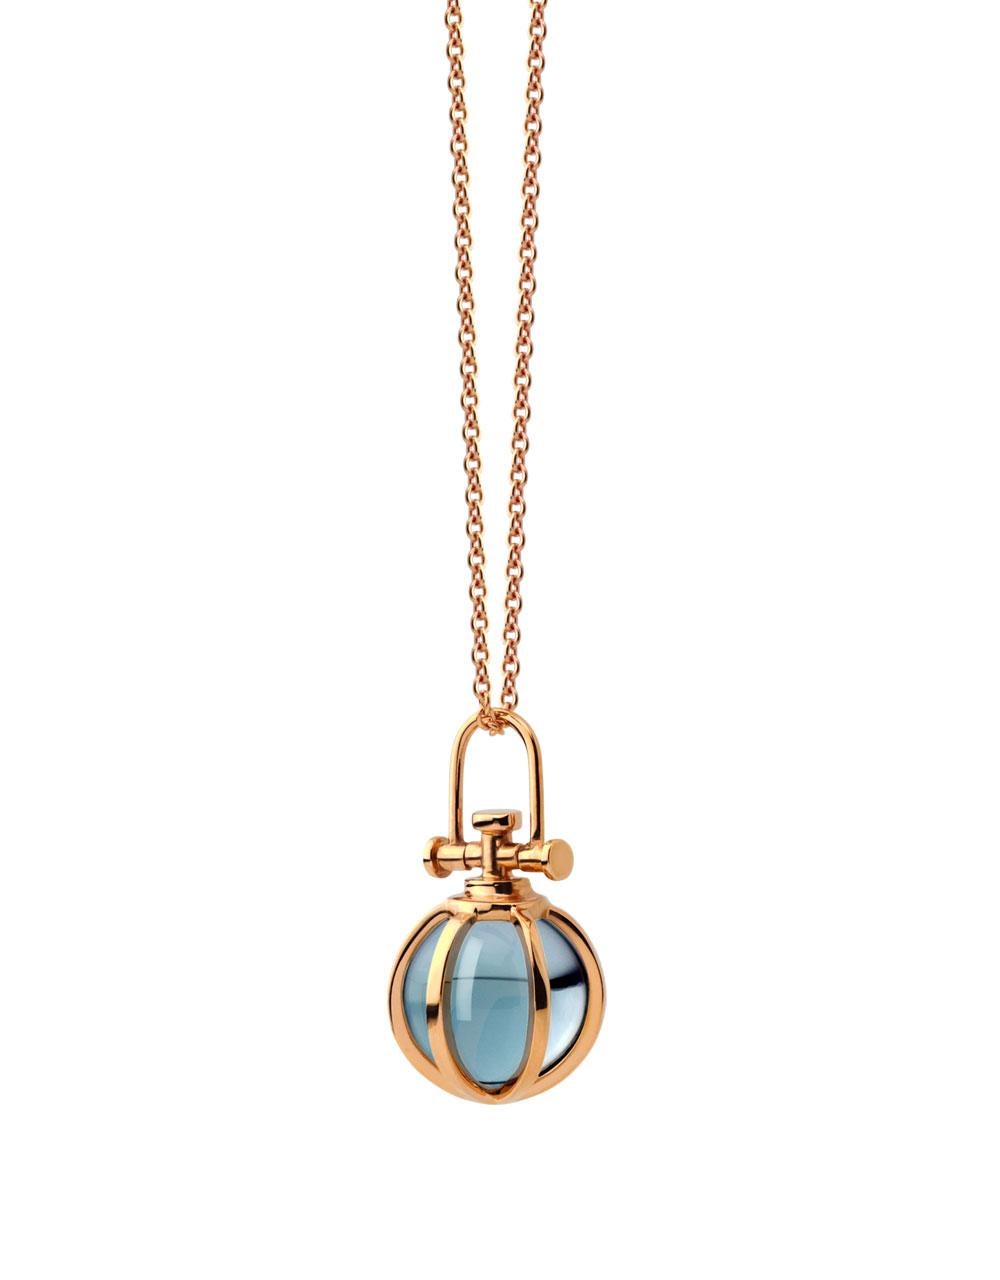 Rebecca Li designs mindfulness. 
This dainty orb necklace is from her Crystal Ball Collection.

Pendant:
Metal Type: 18K Rose Gold
Gemstone: Blue Topaz
Pendant Size: 9 mm W * 9 mm D * 17 mm H
Gemstone Size: 8 mm W * 8 mm D * 8 mm H

Gold